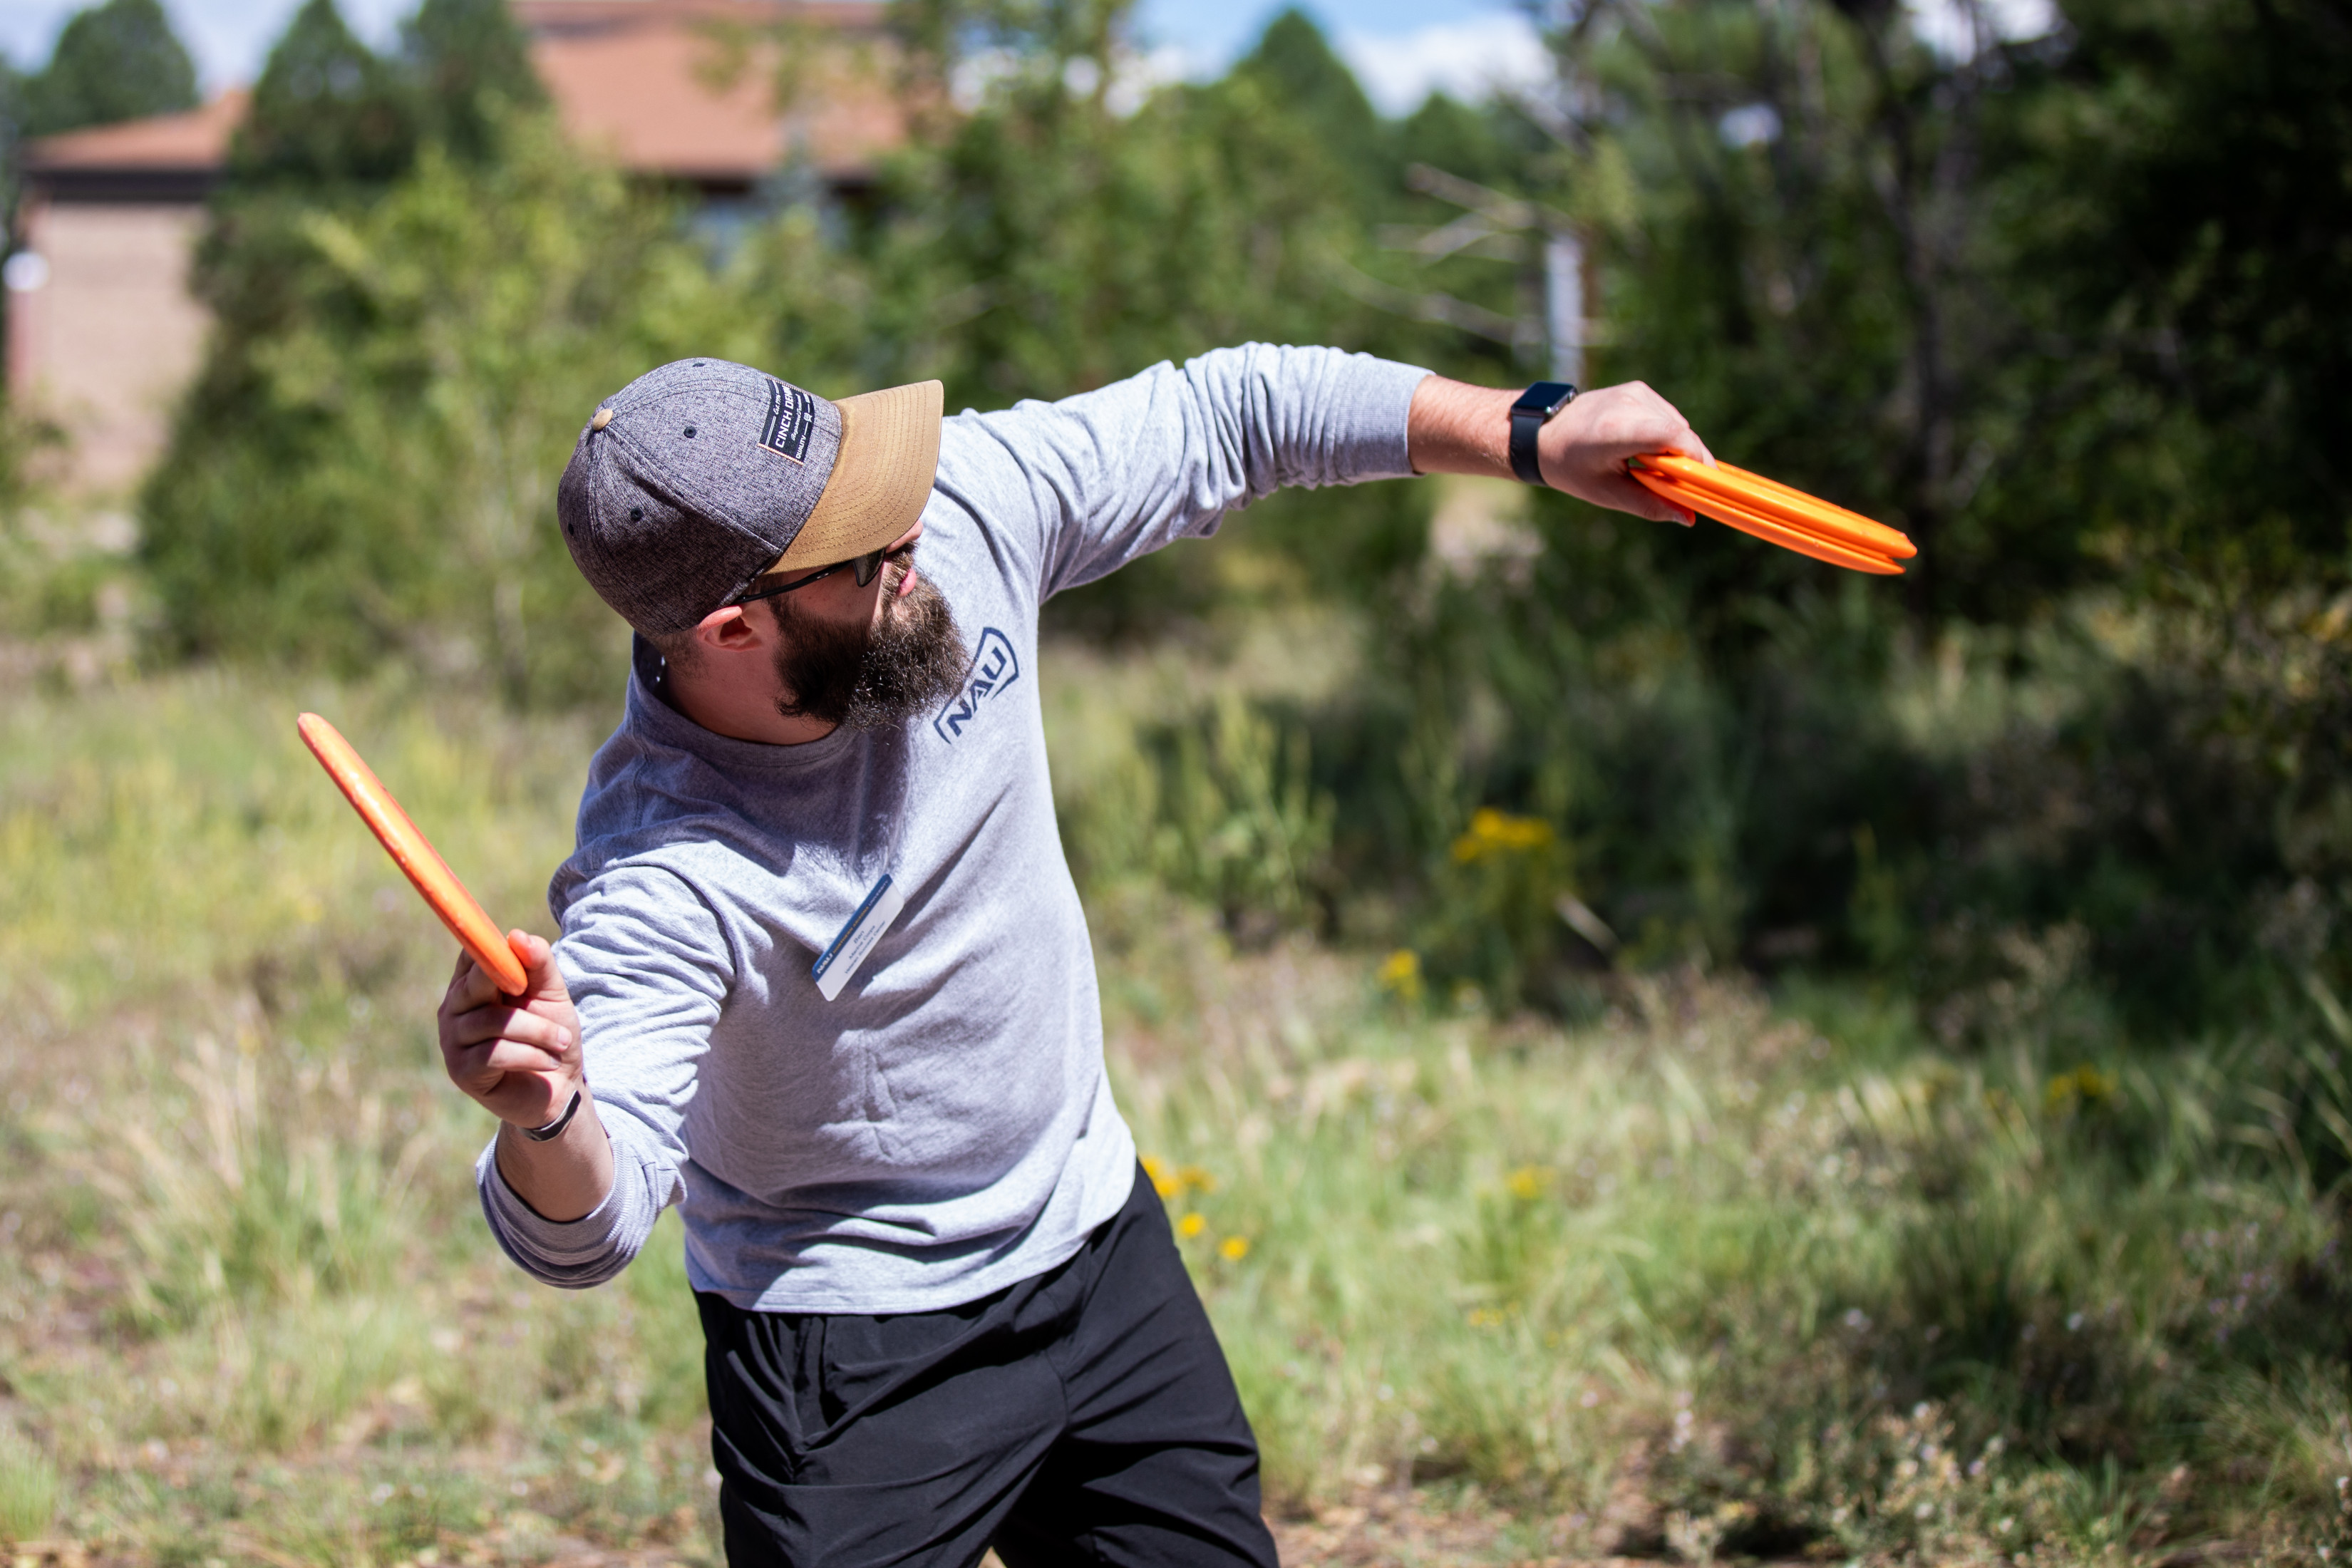 Student throwing a frisbee in a field.